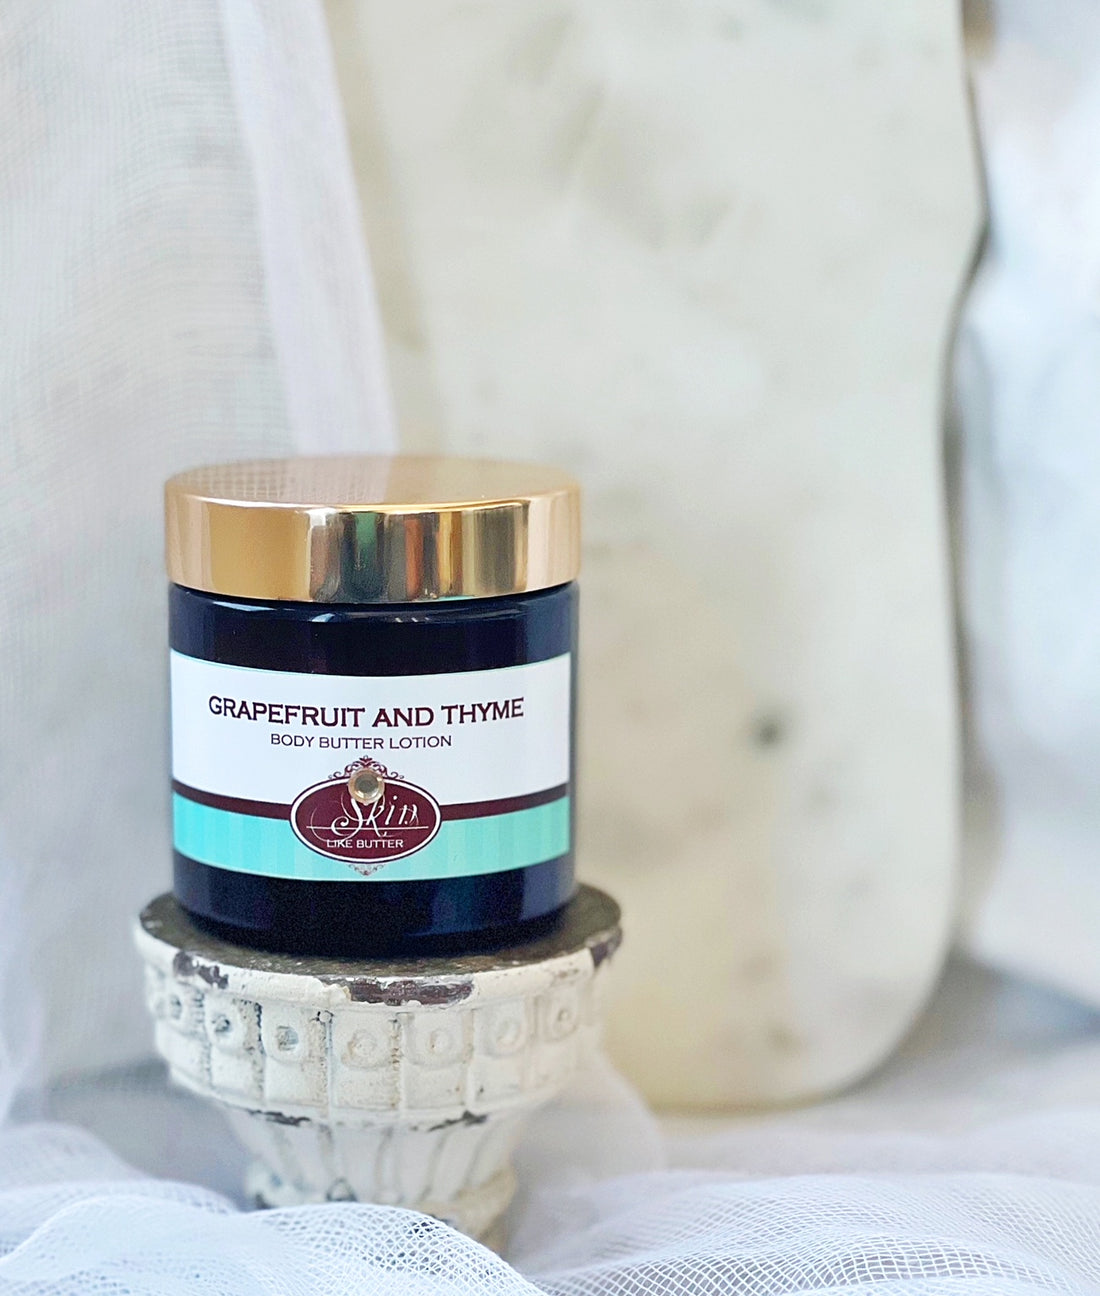 CHERRY ALMOND  scented Body Butter that's vegan, and water free